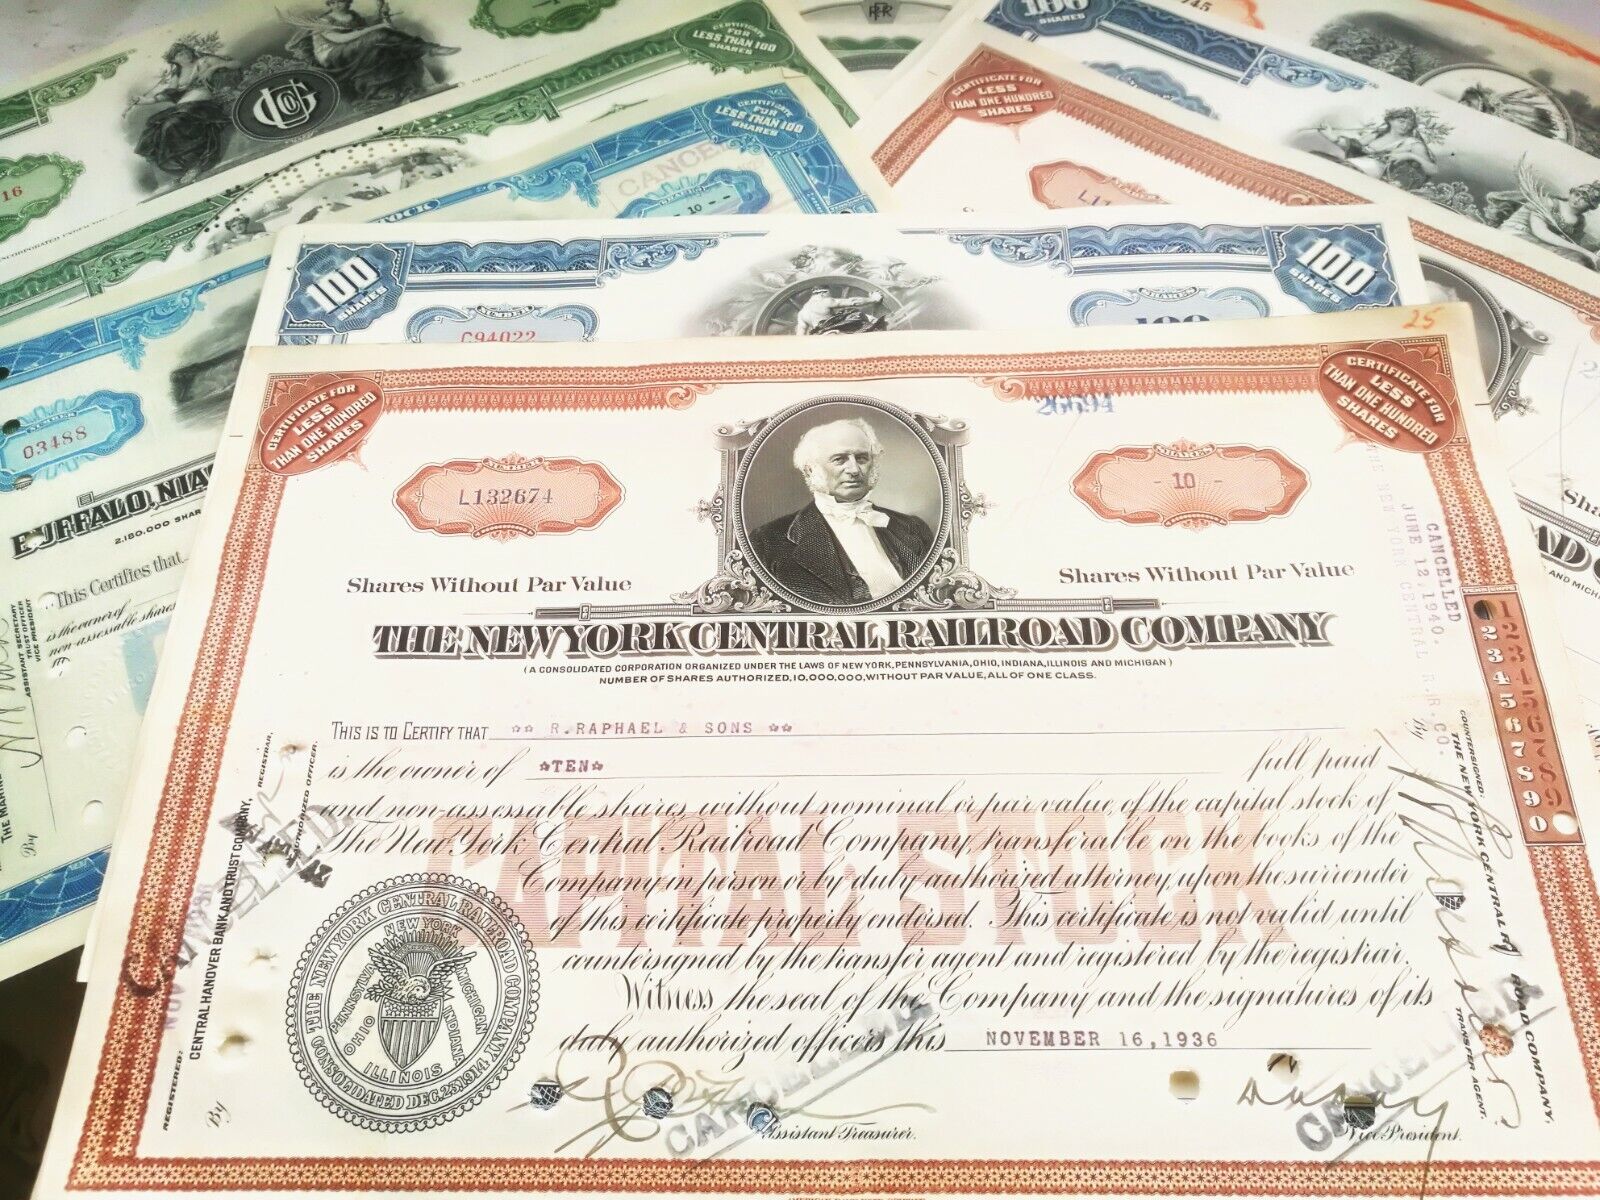 Lot of 10 old vintage stock certificates from different years-1930's-1970's ! Без бренда - фотография #3